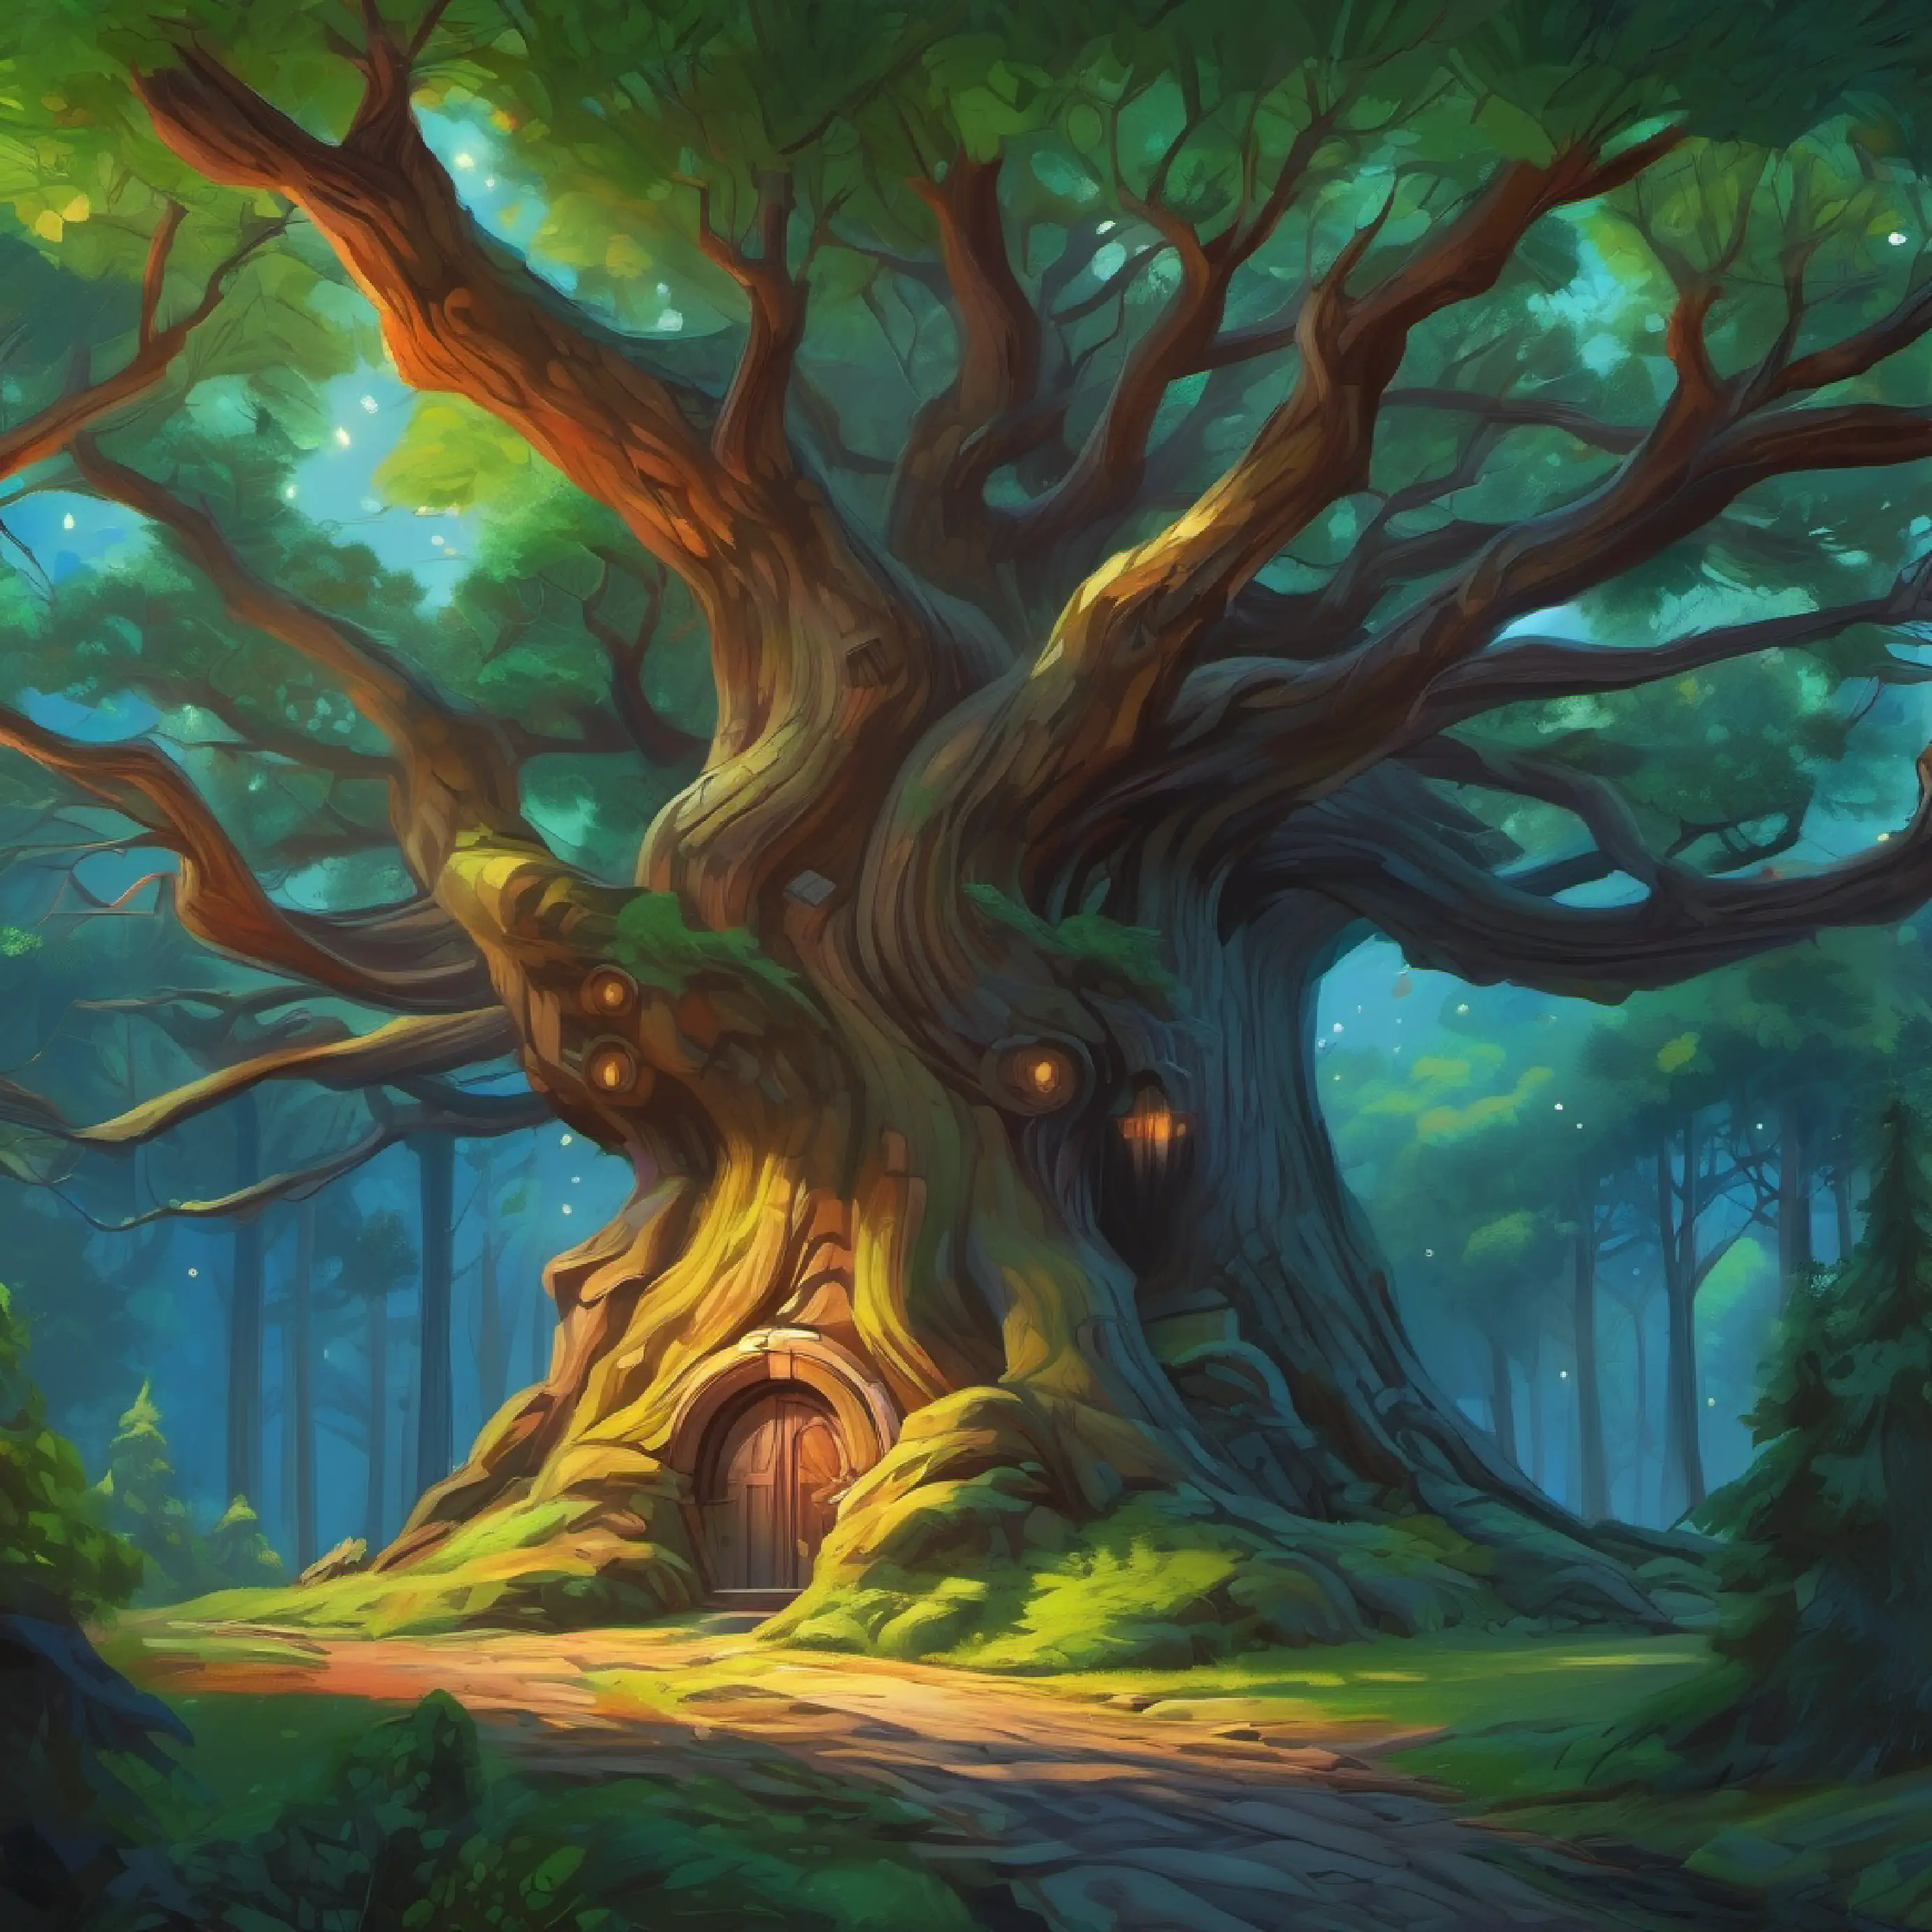 The final destination is revealed: an imposing, ancient tree in the woods' core.